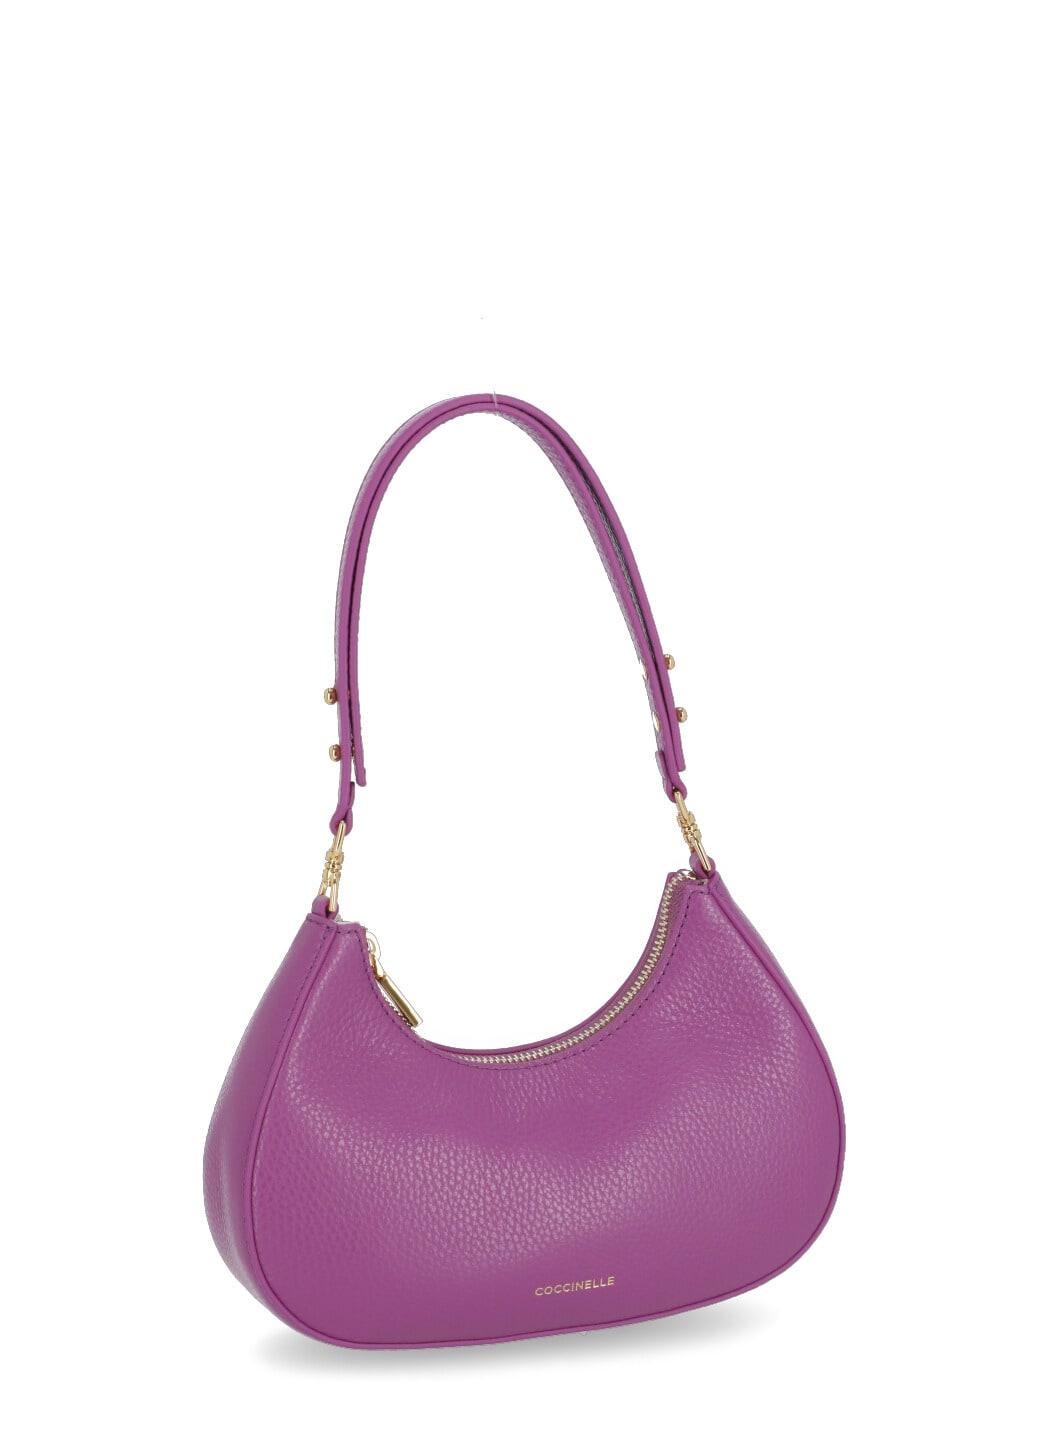 Coccinelle Carrie Hand Bag in Purple | Lyst